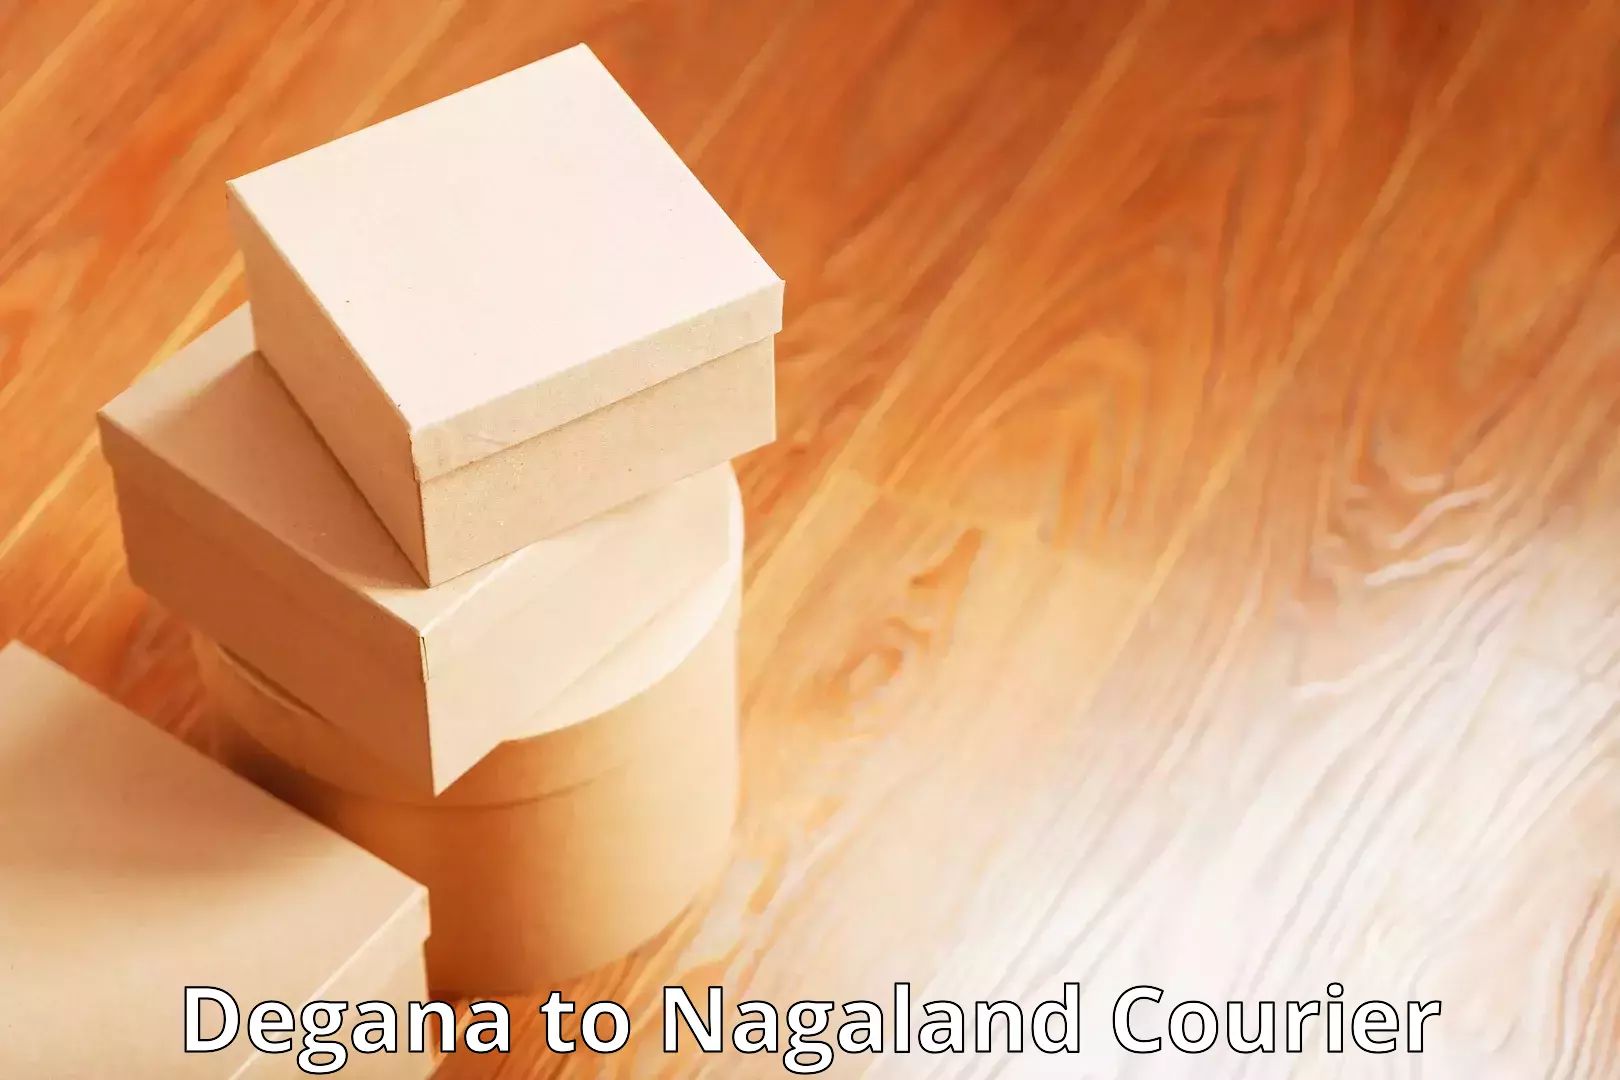 Full-service courier options Degana to Nagaland